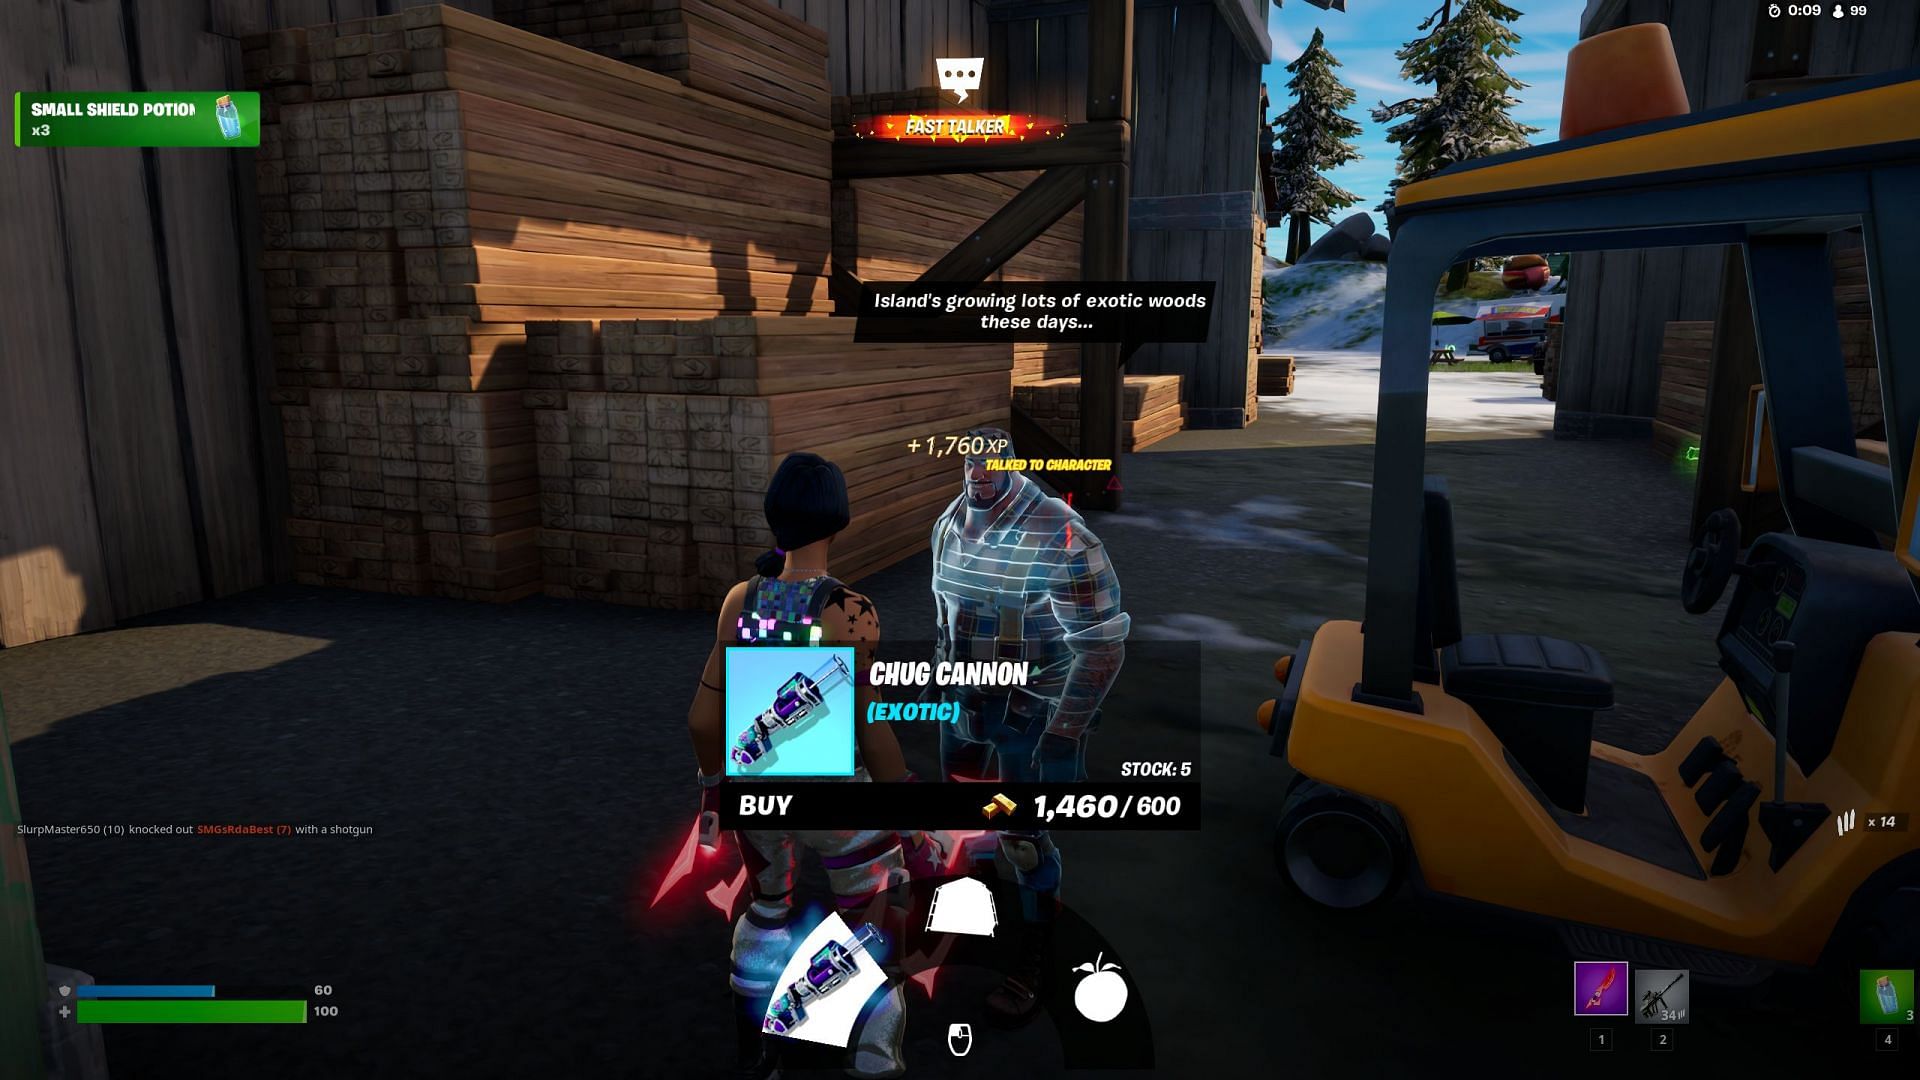 One can purchase Chug Cannon from Kyle to perform the glitch faster. [Image via Epic Games]